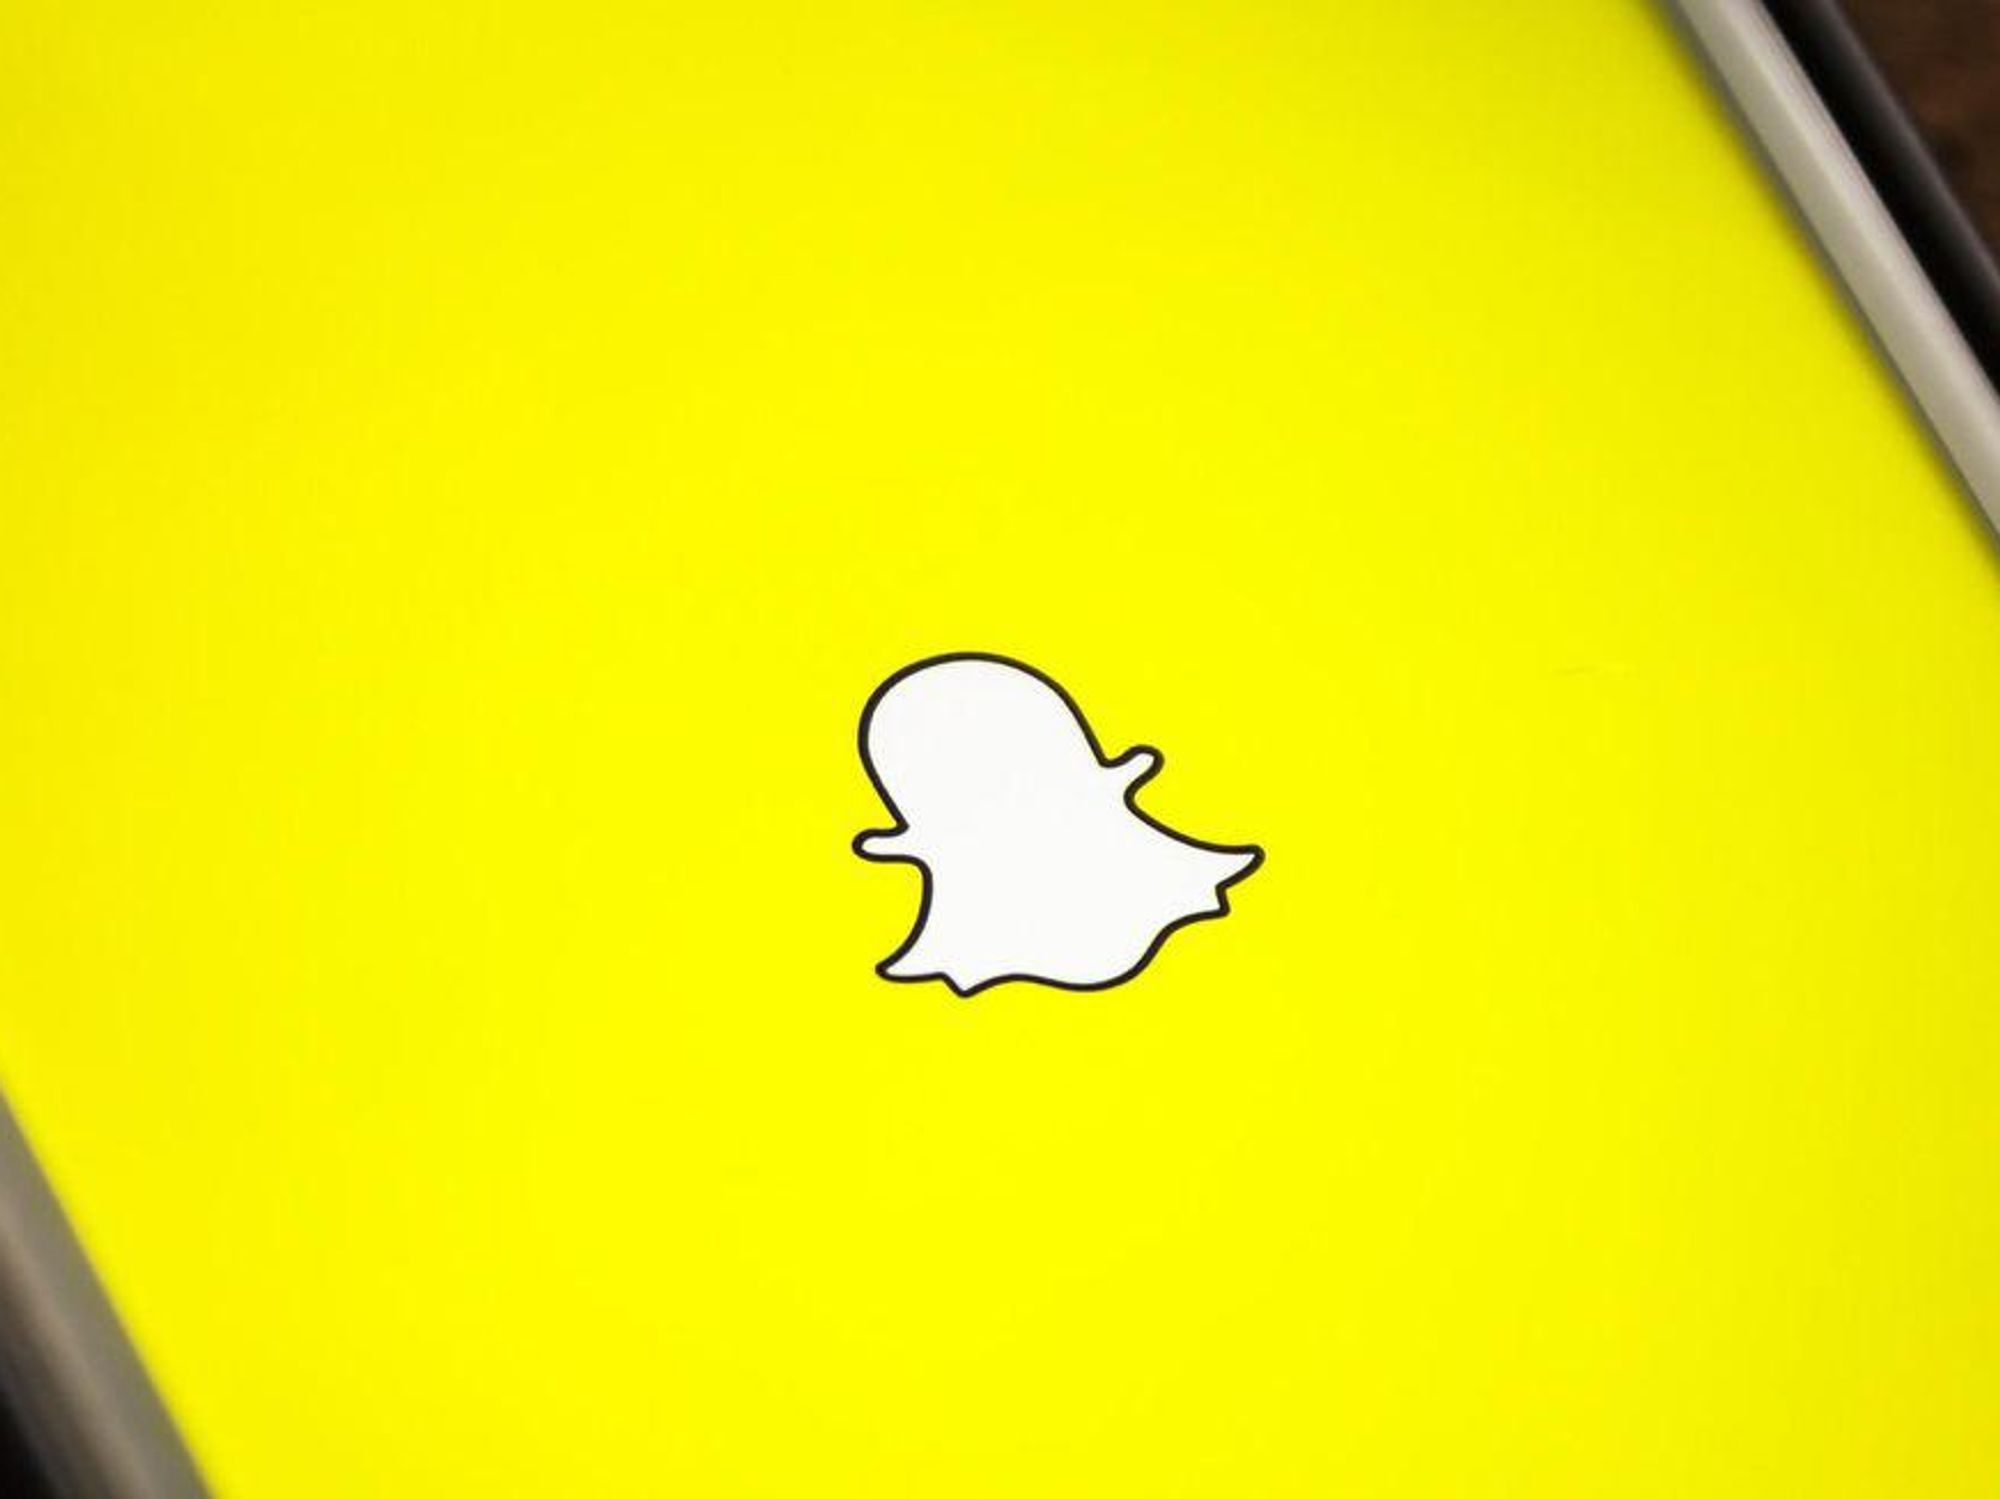 SCOTUS: Snapchat Post is Protected Free Speech